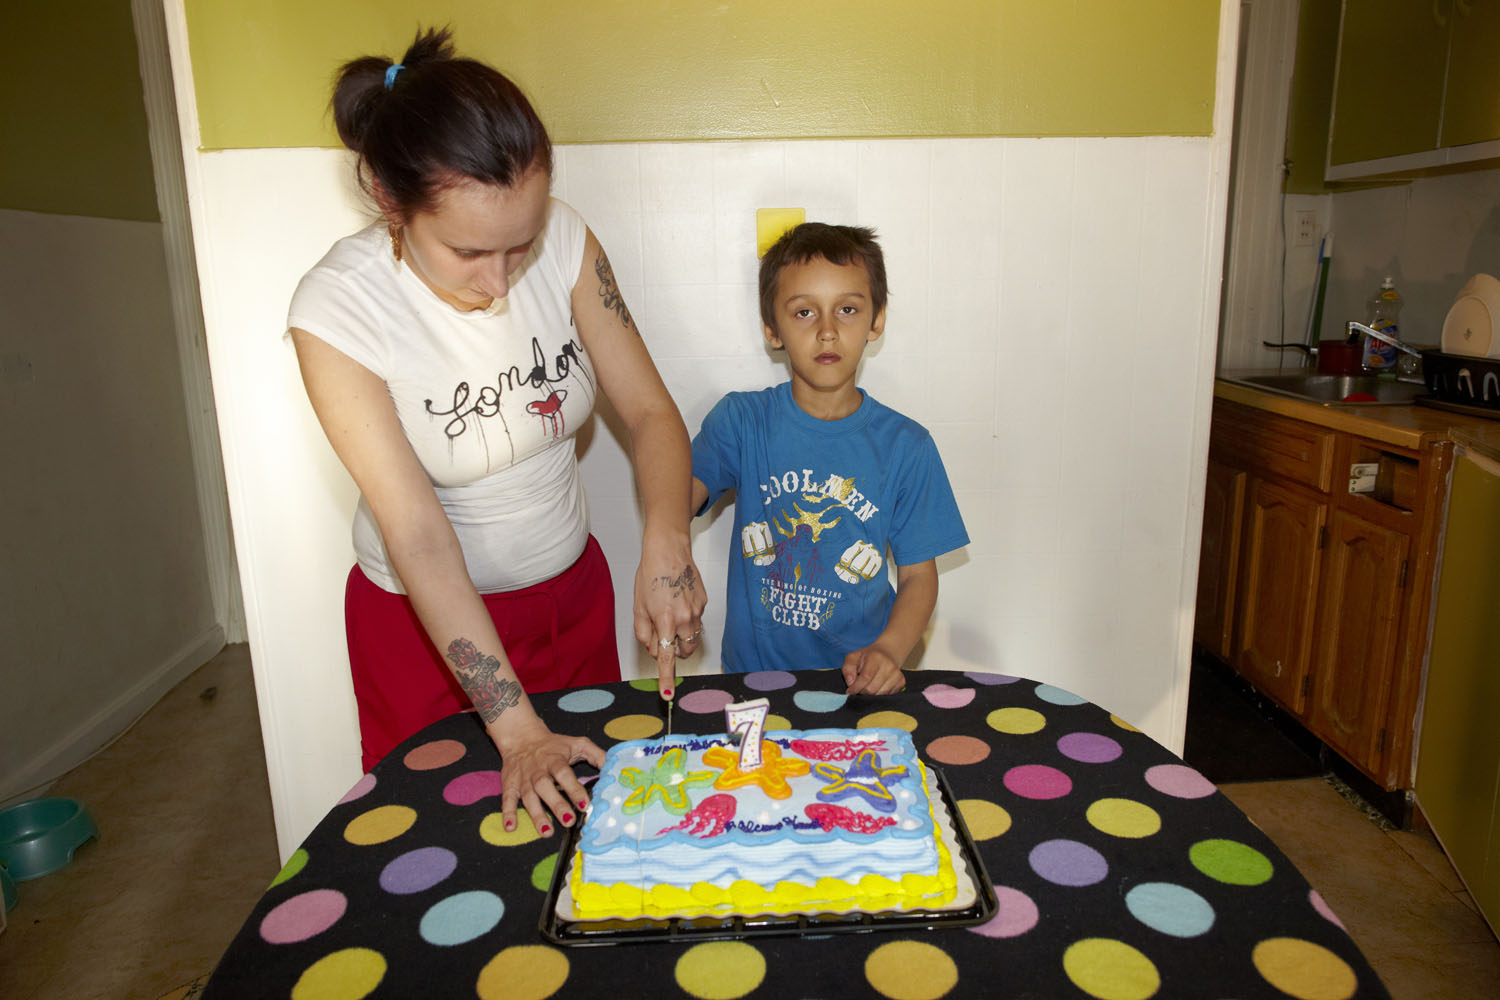 Donny celebrates his seventh birthday a day late after spending his real birthday in a pediatric crisis after threatening to jump out the second floor window of his home.